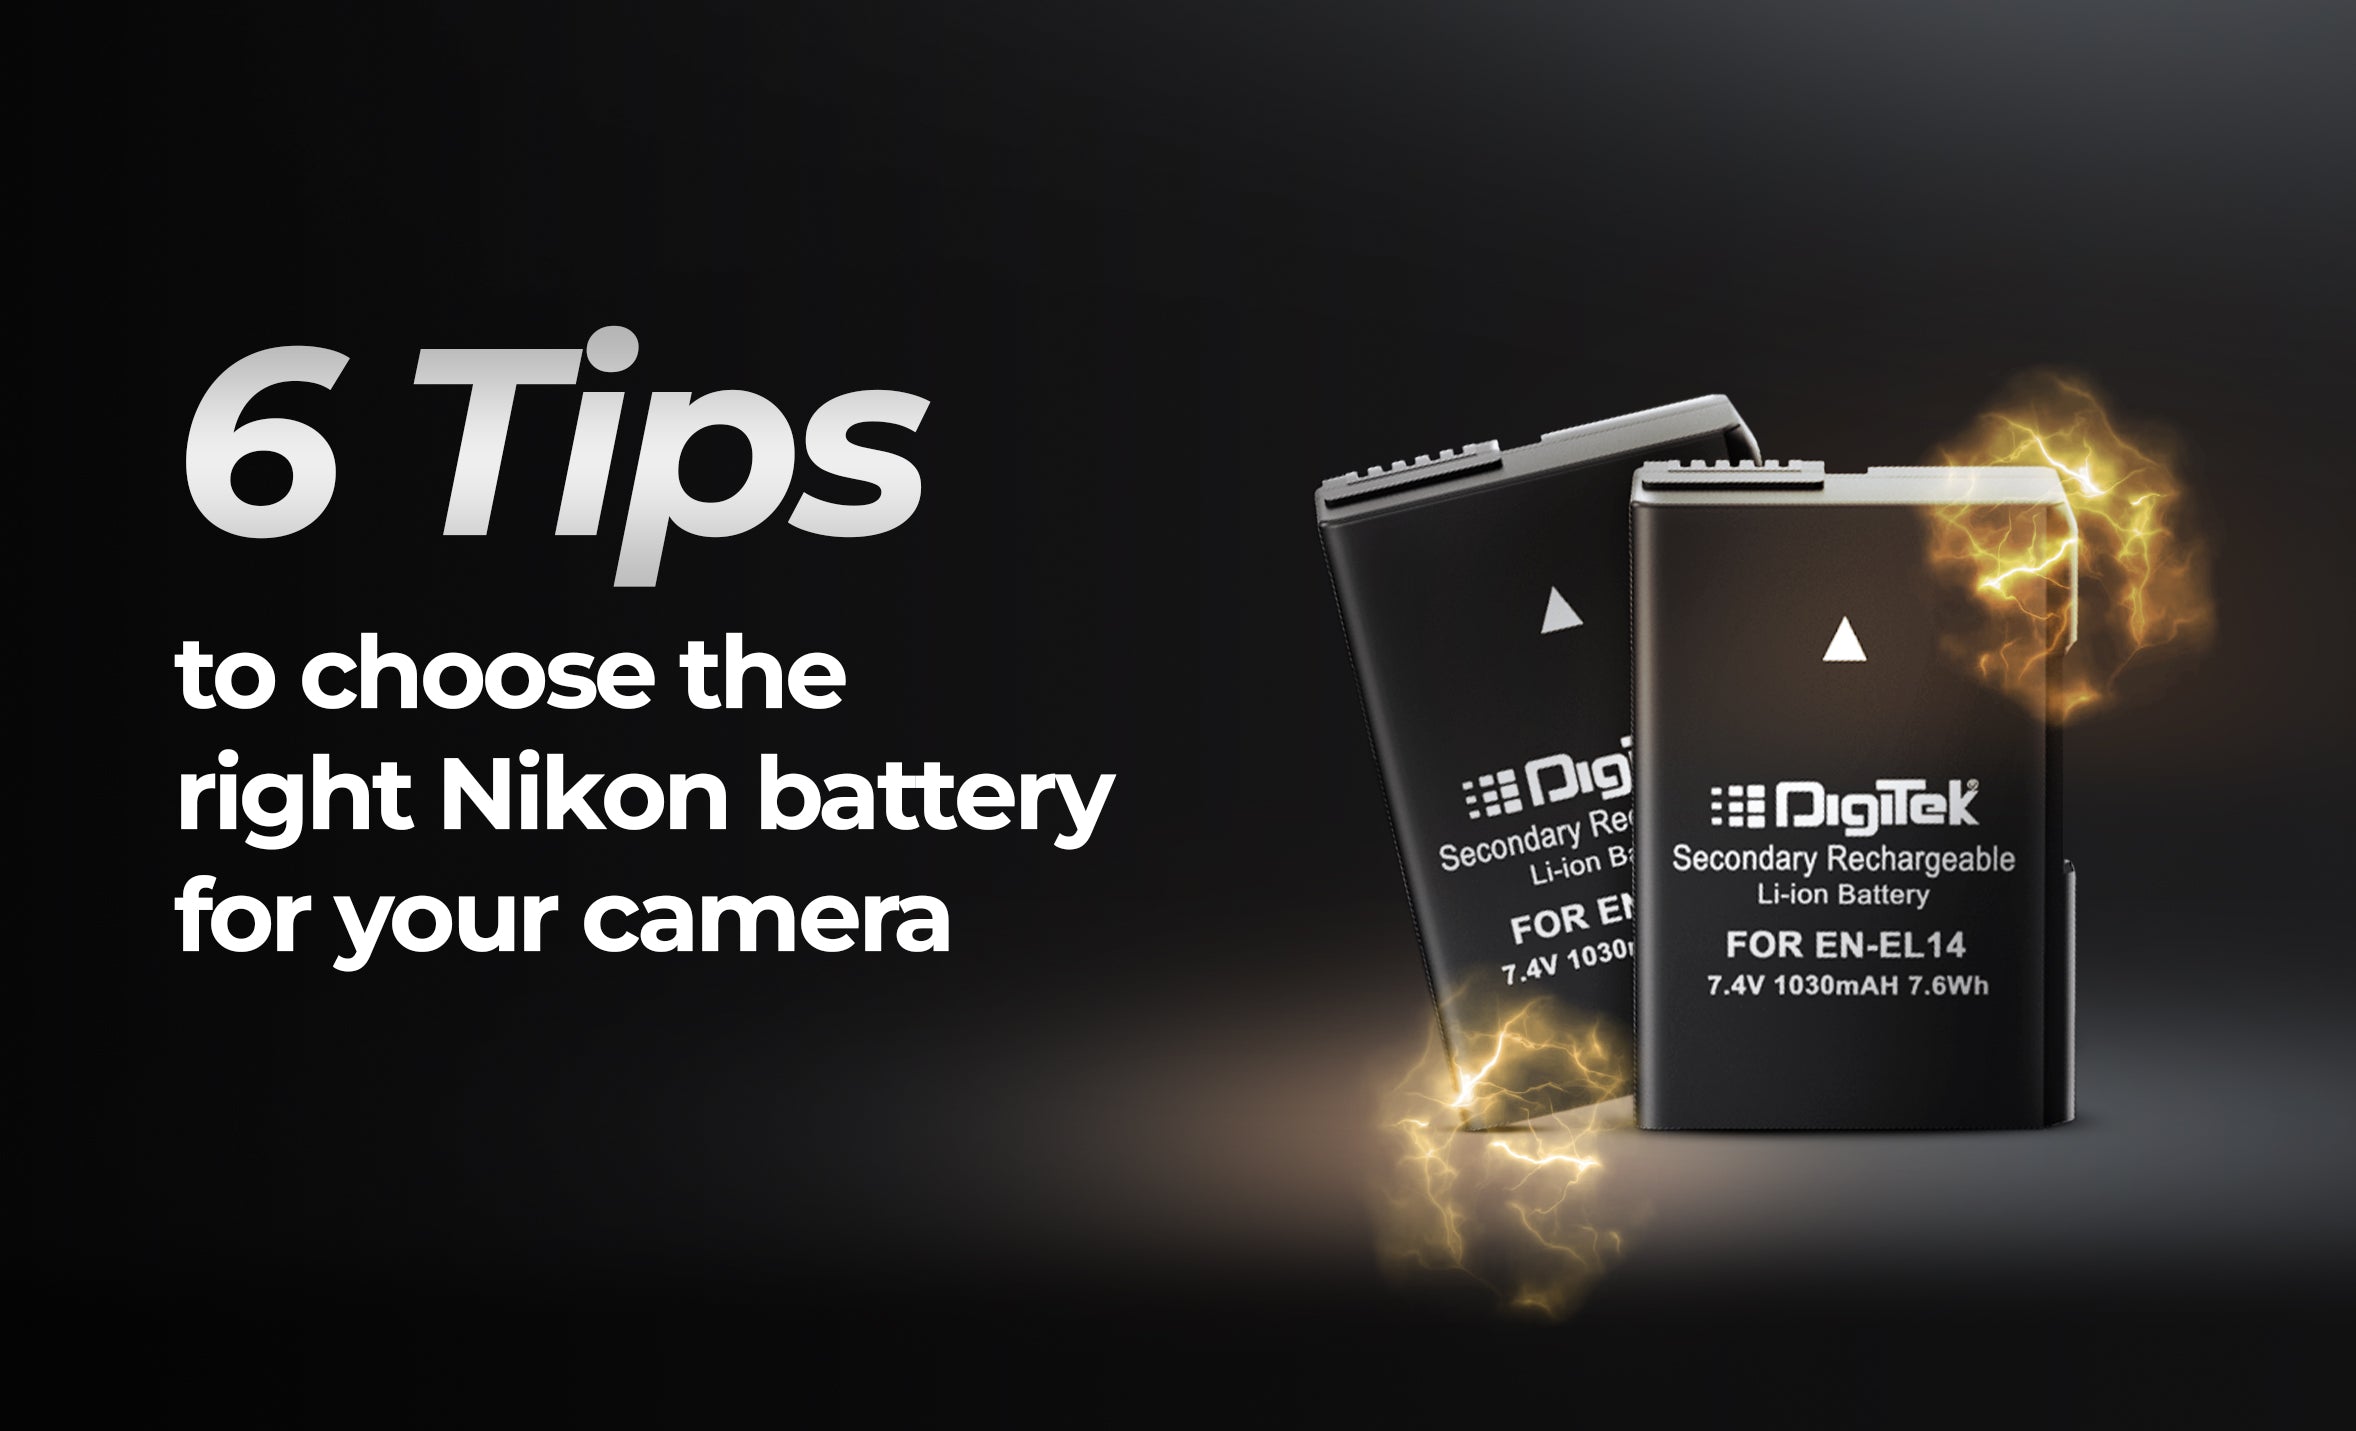 6 Tips to choose the right Nikon battery for your camera